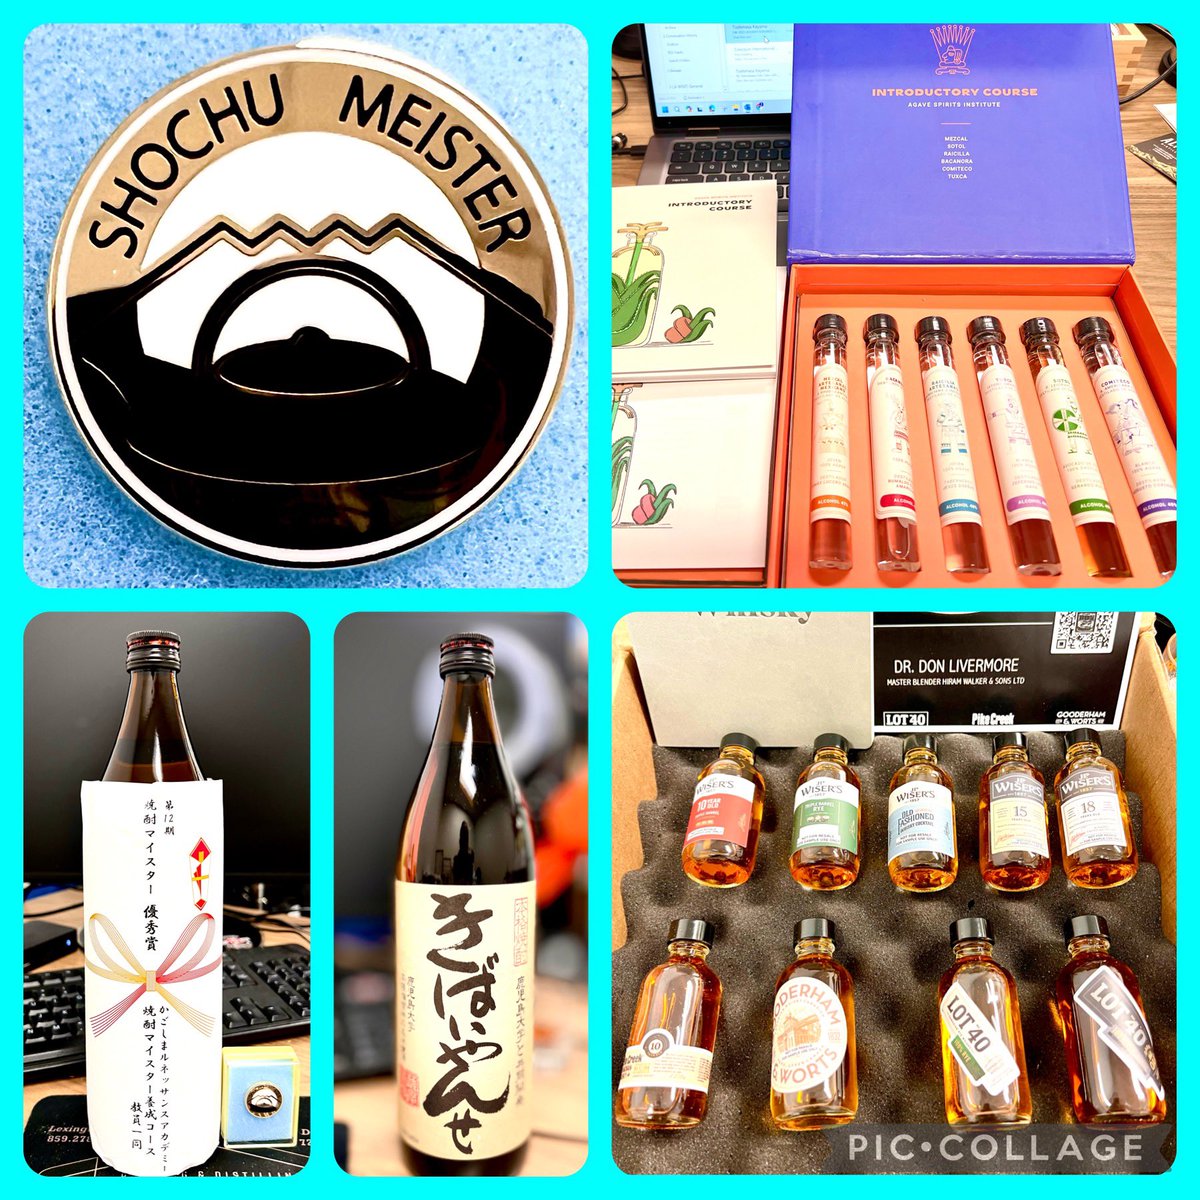 Returned to my desk after two weeks of travel, so delighted to find these, Shochu Meister Shochu and Pin, Canadian Whiskey sample set and Agave Spirits sample set textbook😻

#shochumeister #canadianwhiskey #agavespirits #internationaldrinksspecialists #dipwset #wsetdiploma